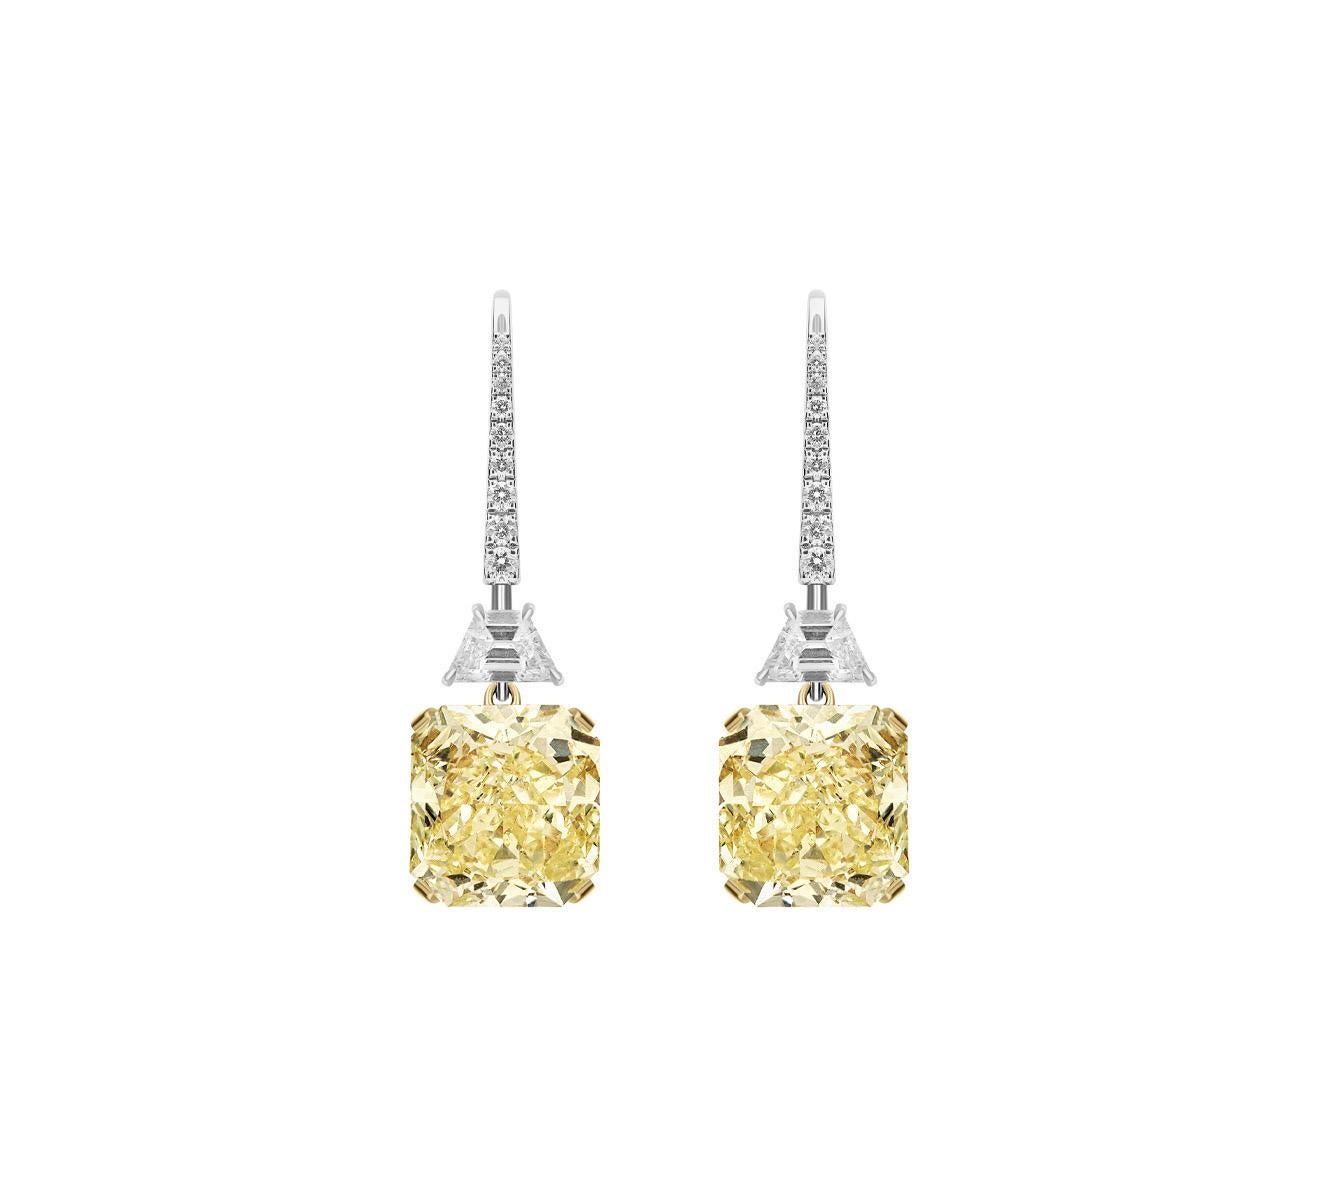 Beautiful Earrings featuring a well-matched 6.01 Carat with a 5.52 Carat. Both Certified by GIA as Fancy Light Yellow in color and VS1 in clarity.
11.53 Carat in total for a Unique and Magnificent pair.
Stones are rectangular and cut to maximize